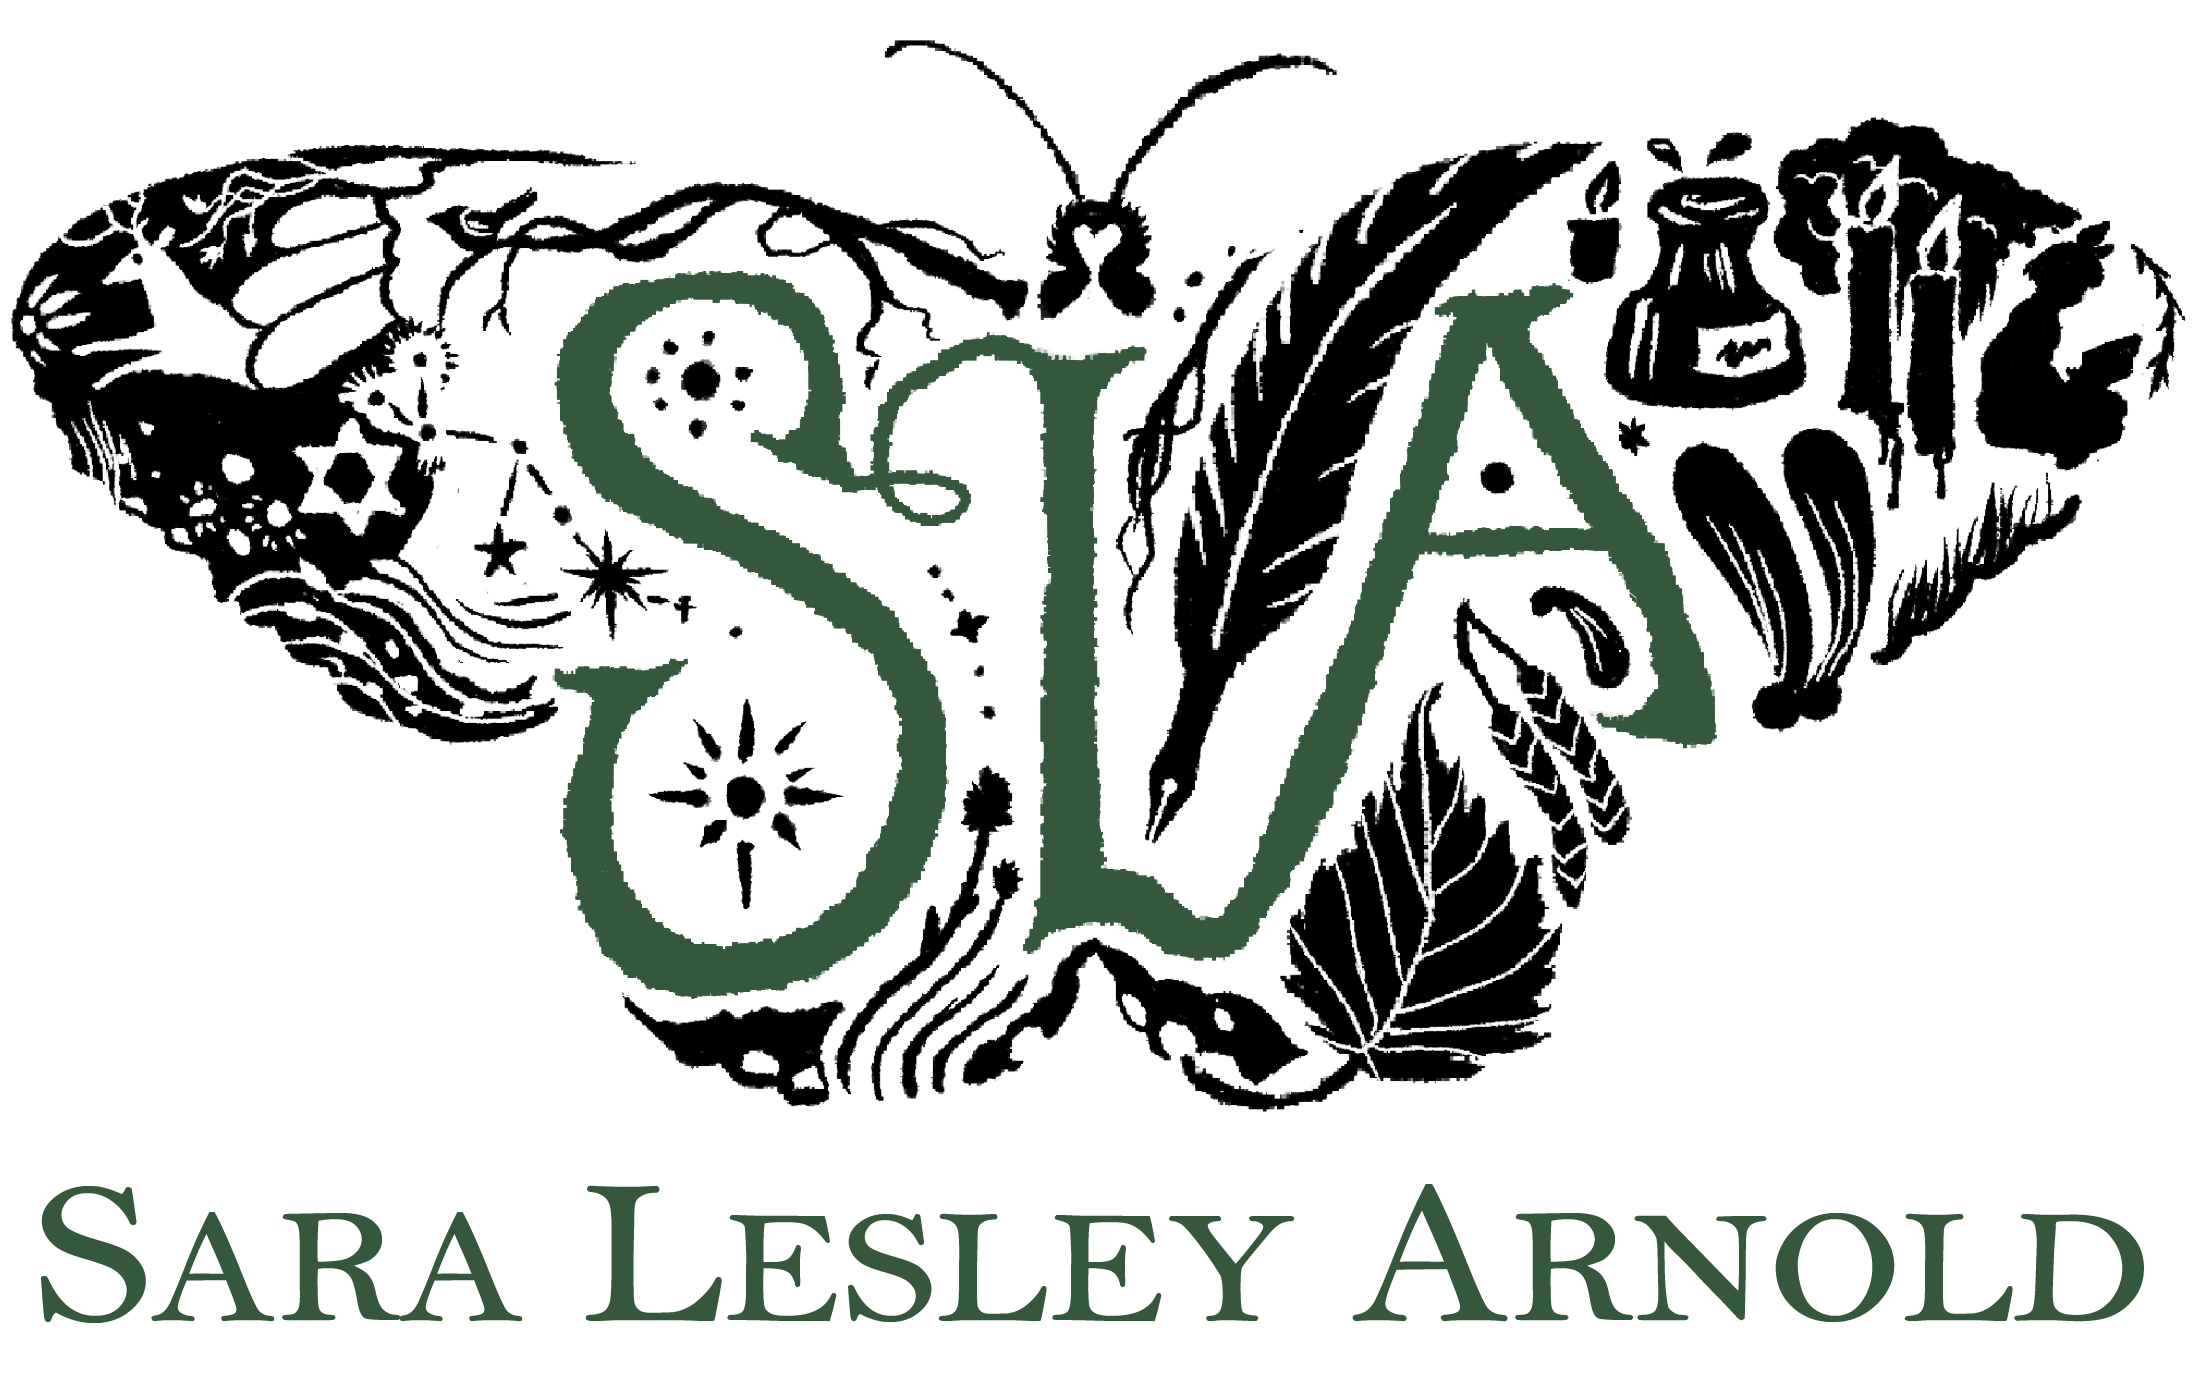 Sara Lesley Arnold butterfly logo